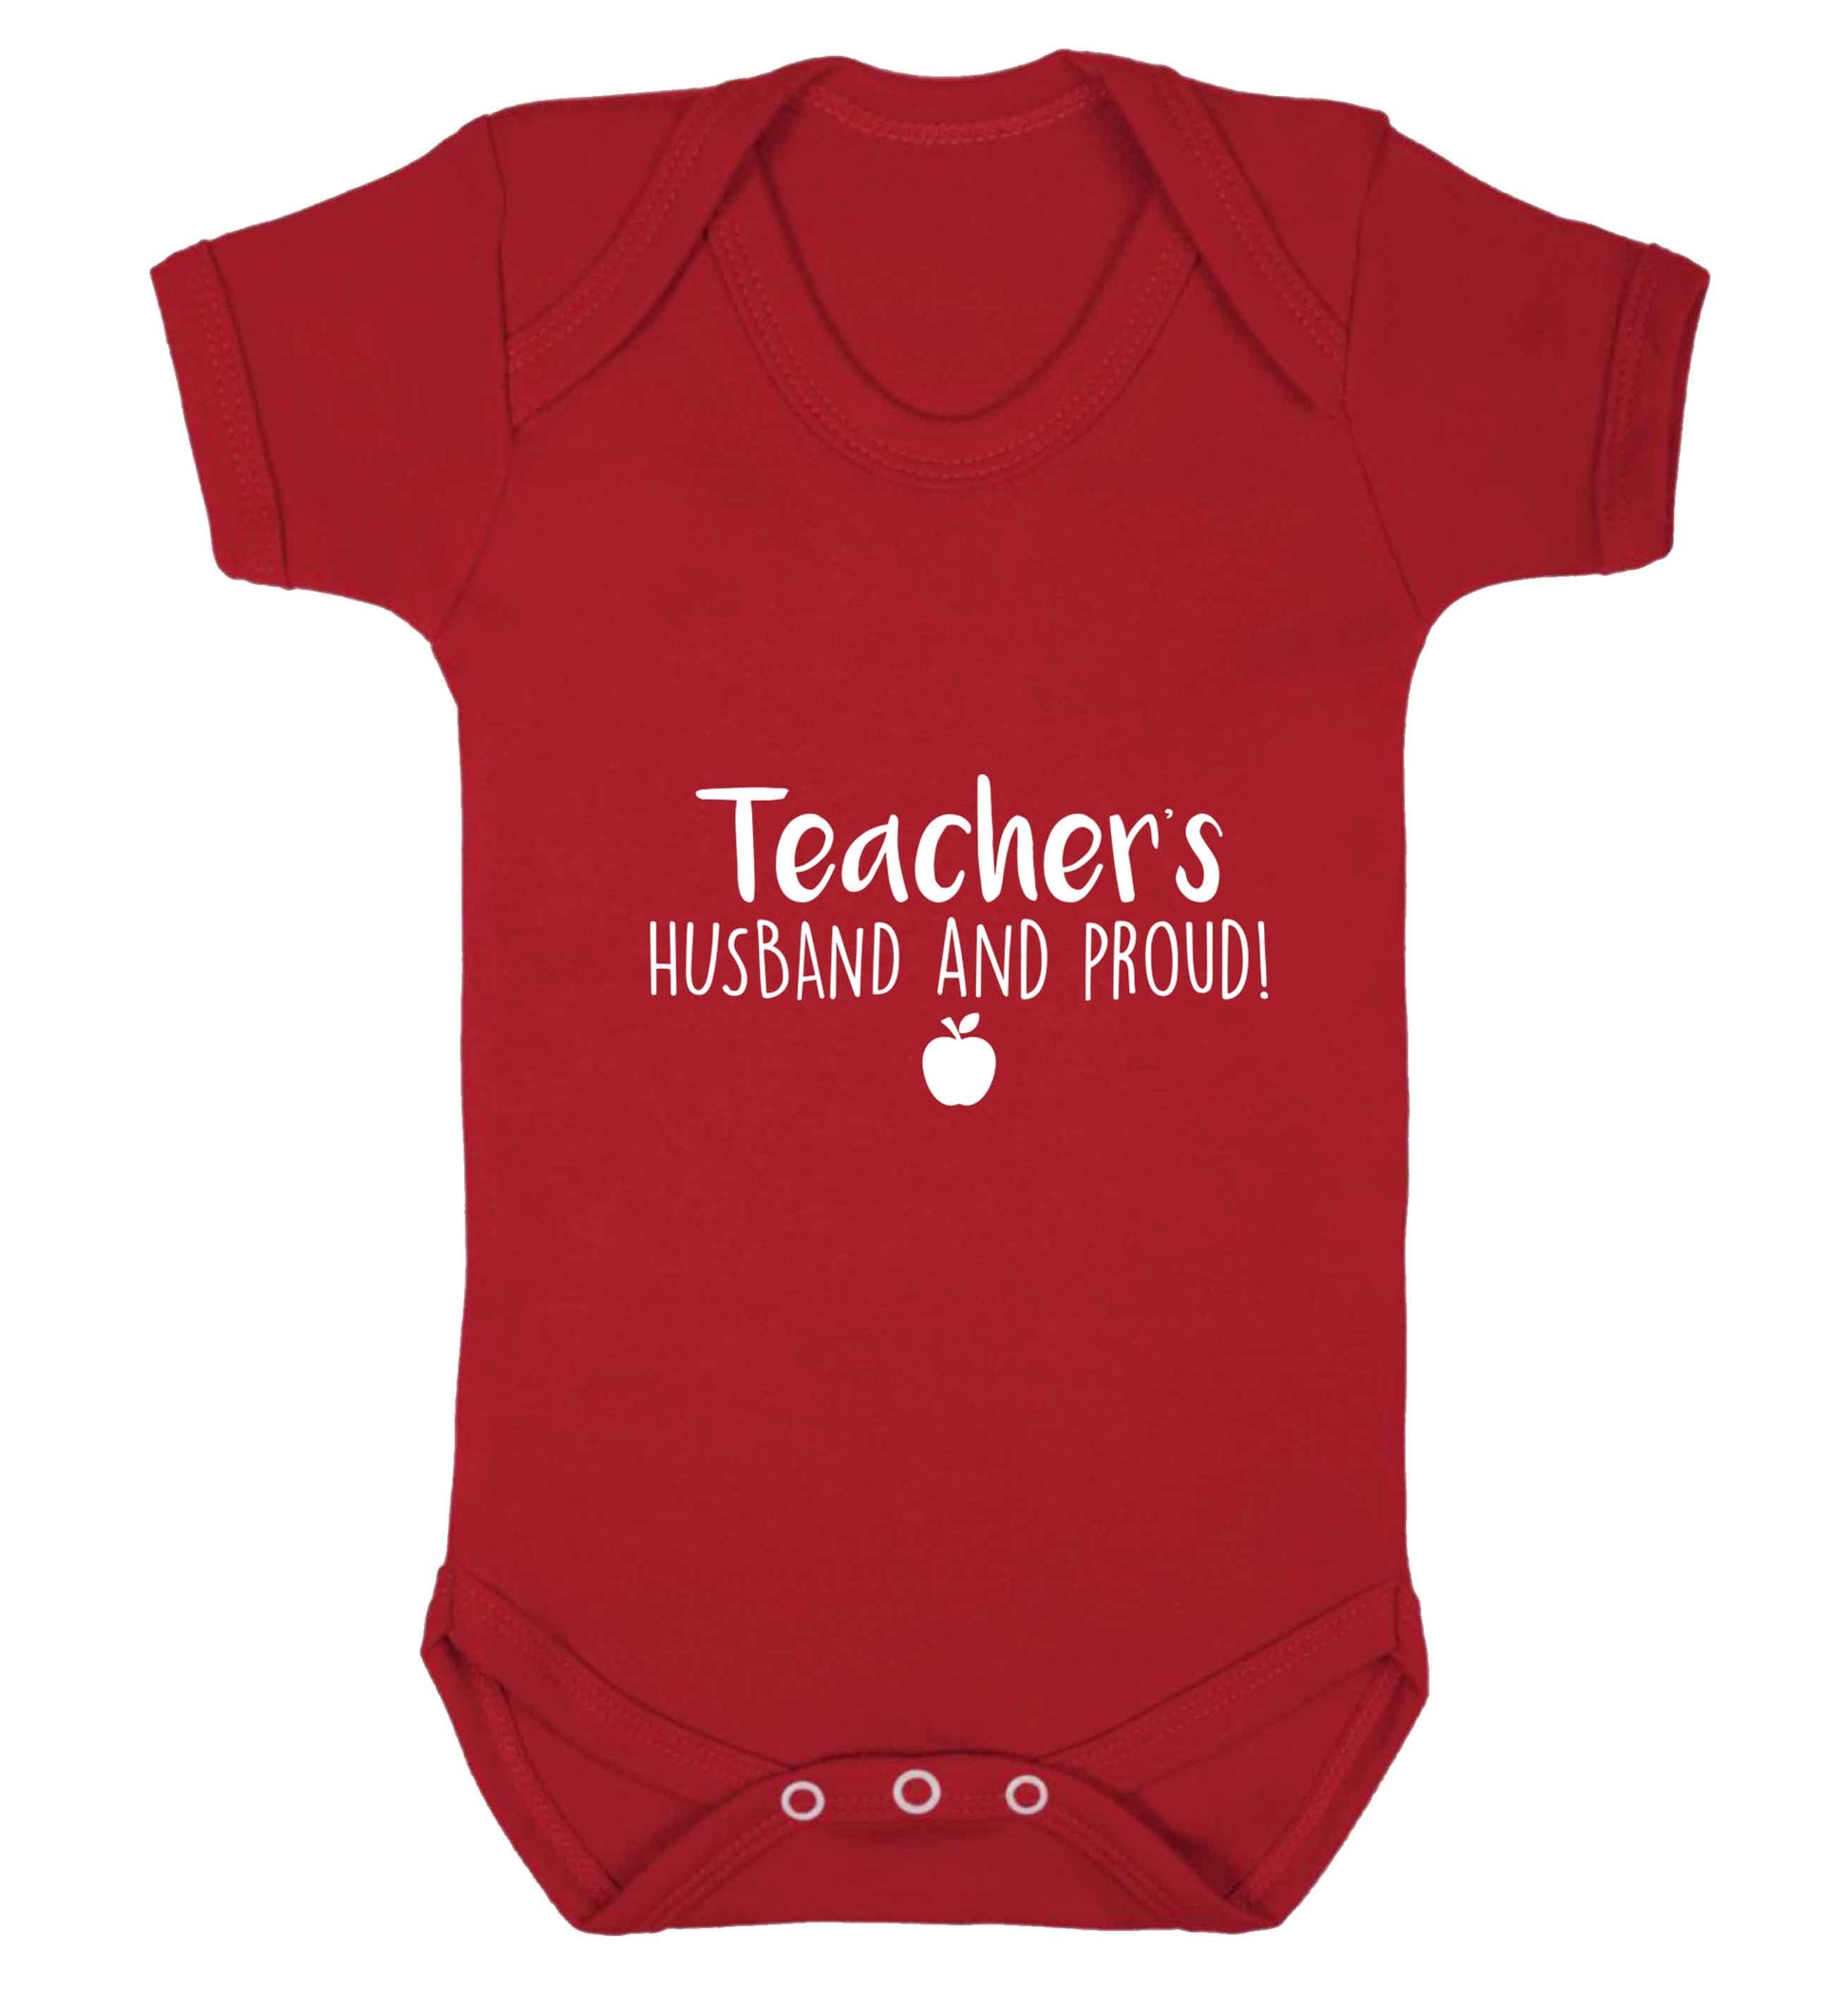 Teachers husband and proud baby vest red 18-24 months